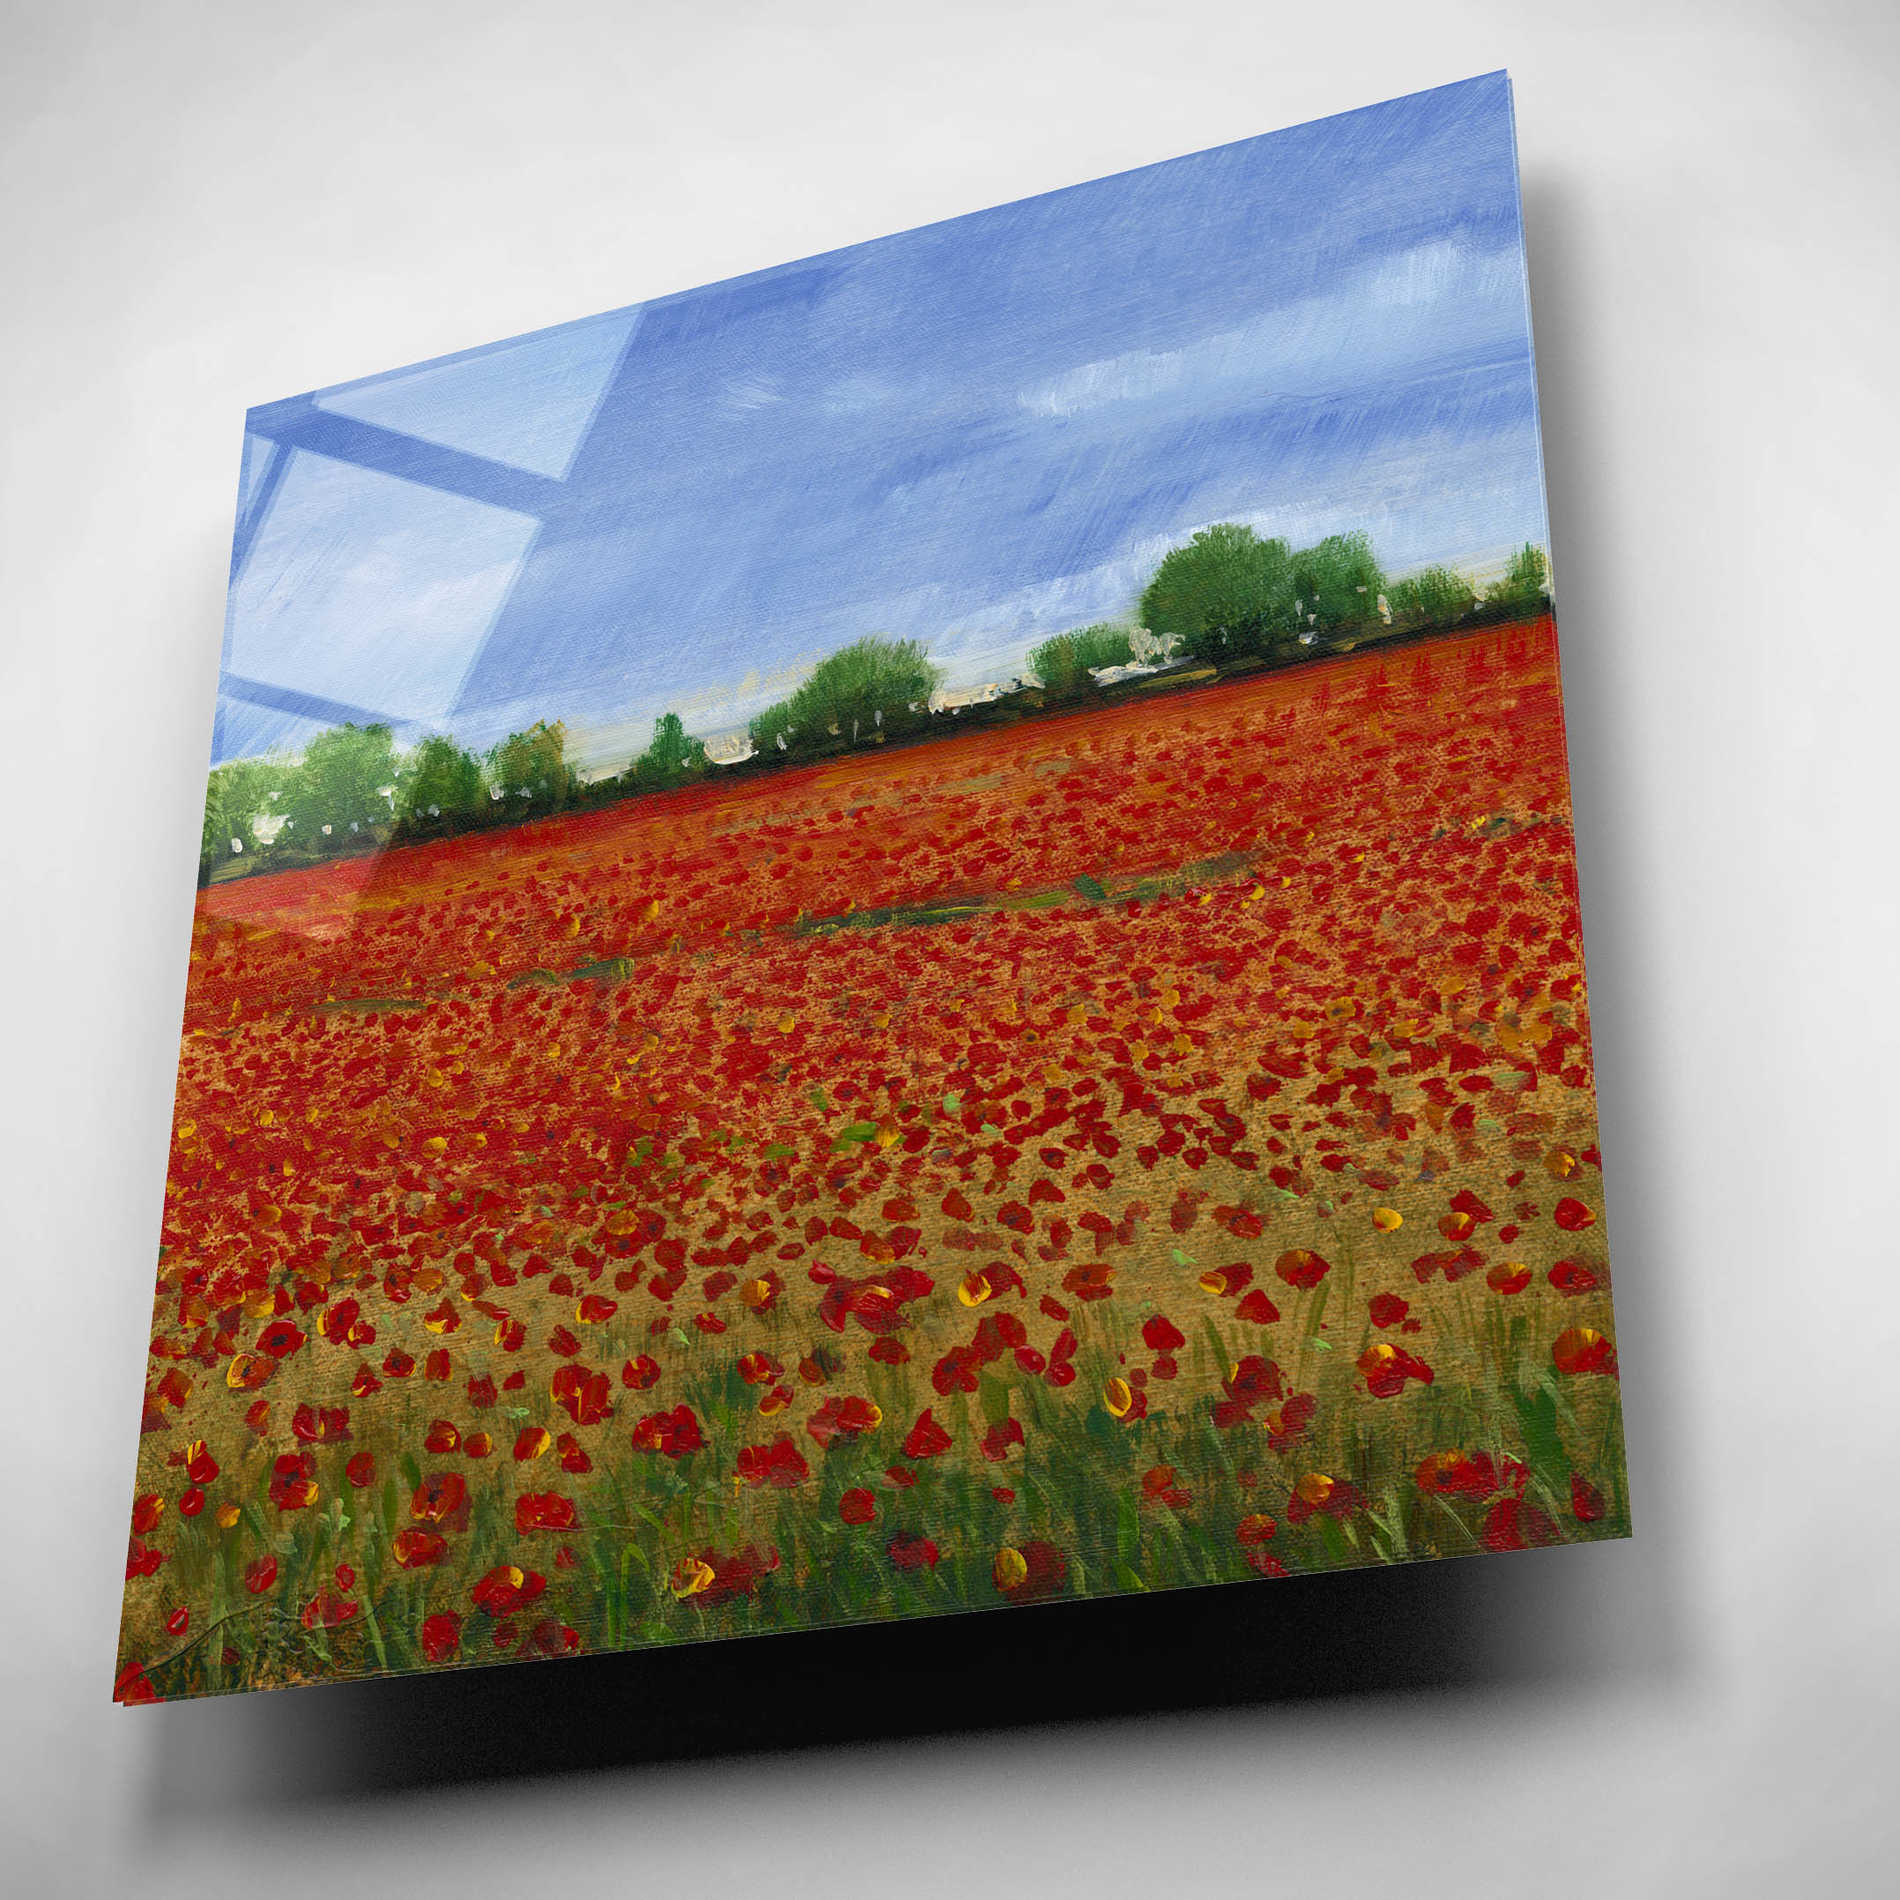 Epic Art 'Field of Poppies I' by Tim O'Toole, Acrylic Glass Wall Art,12x12